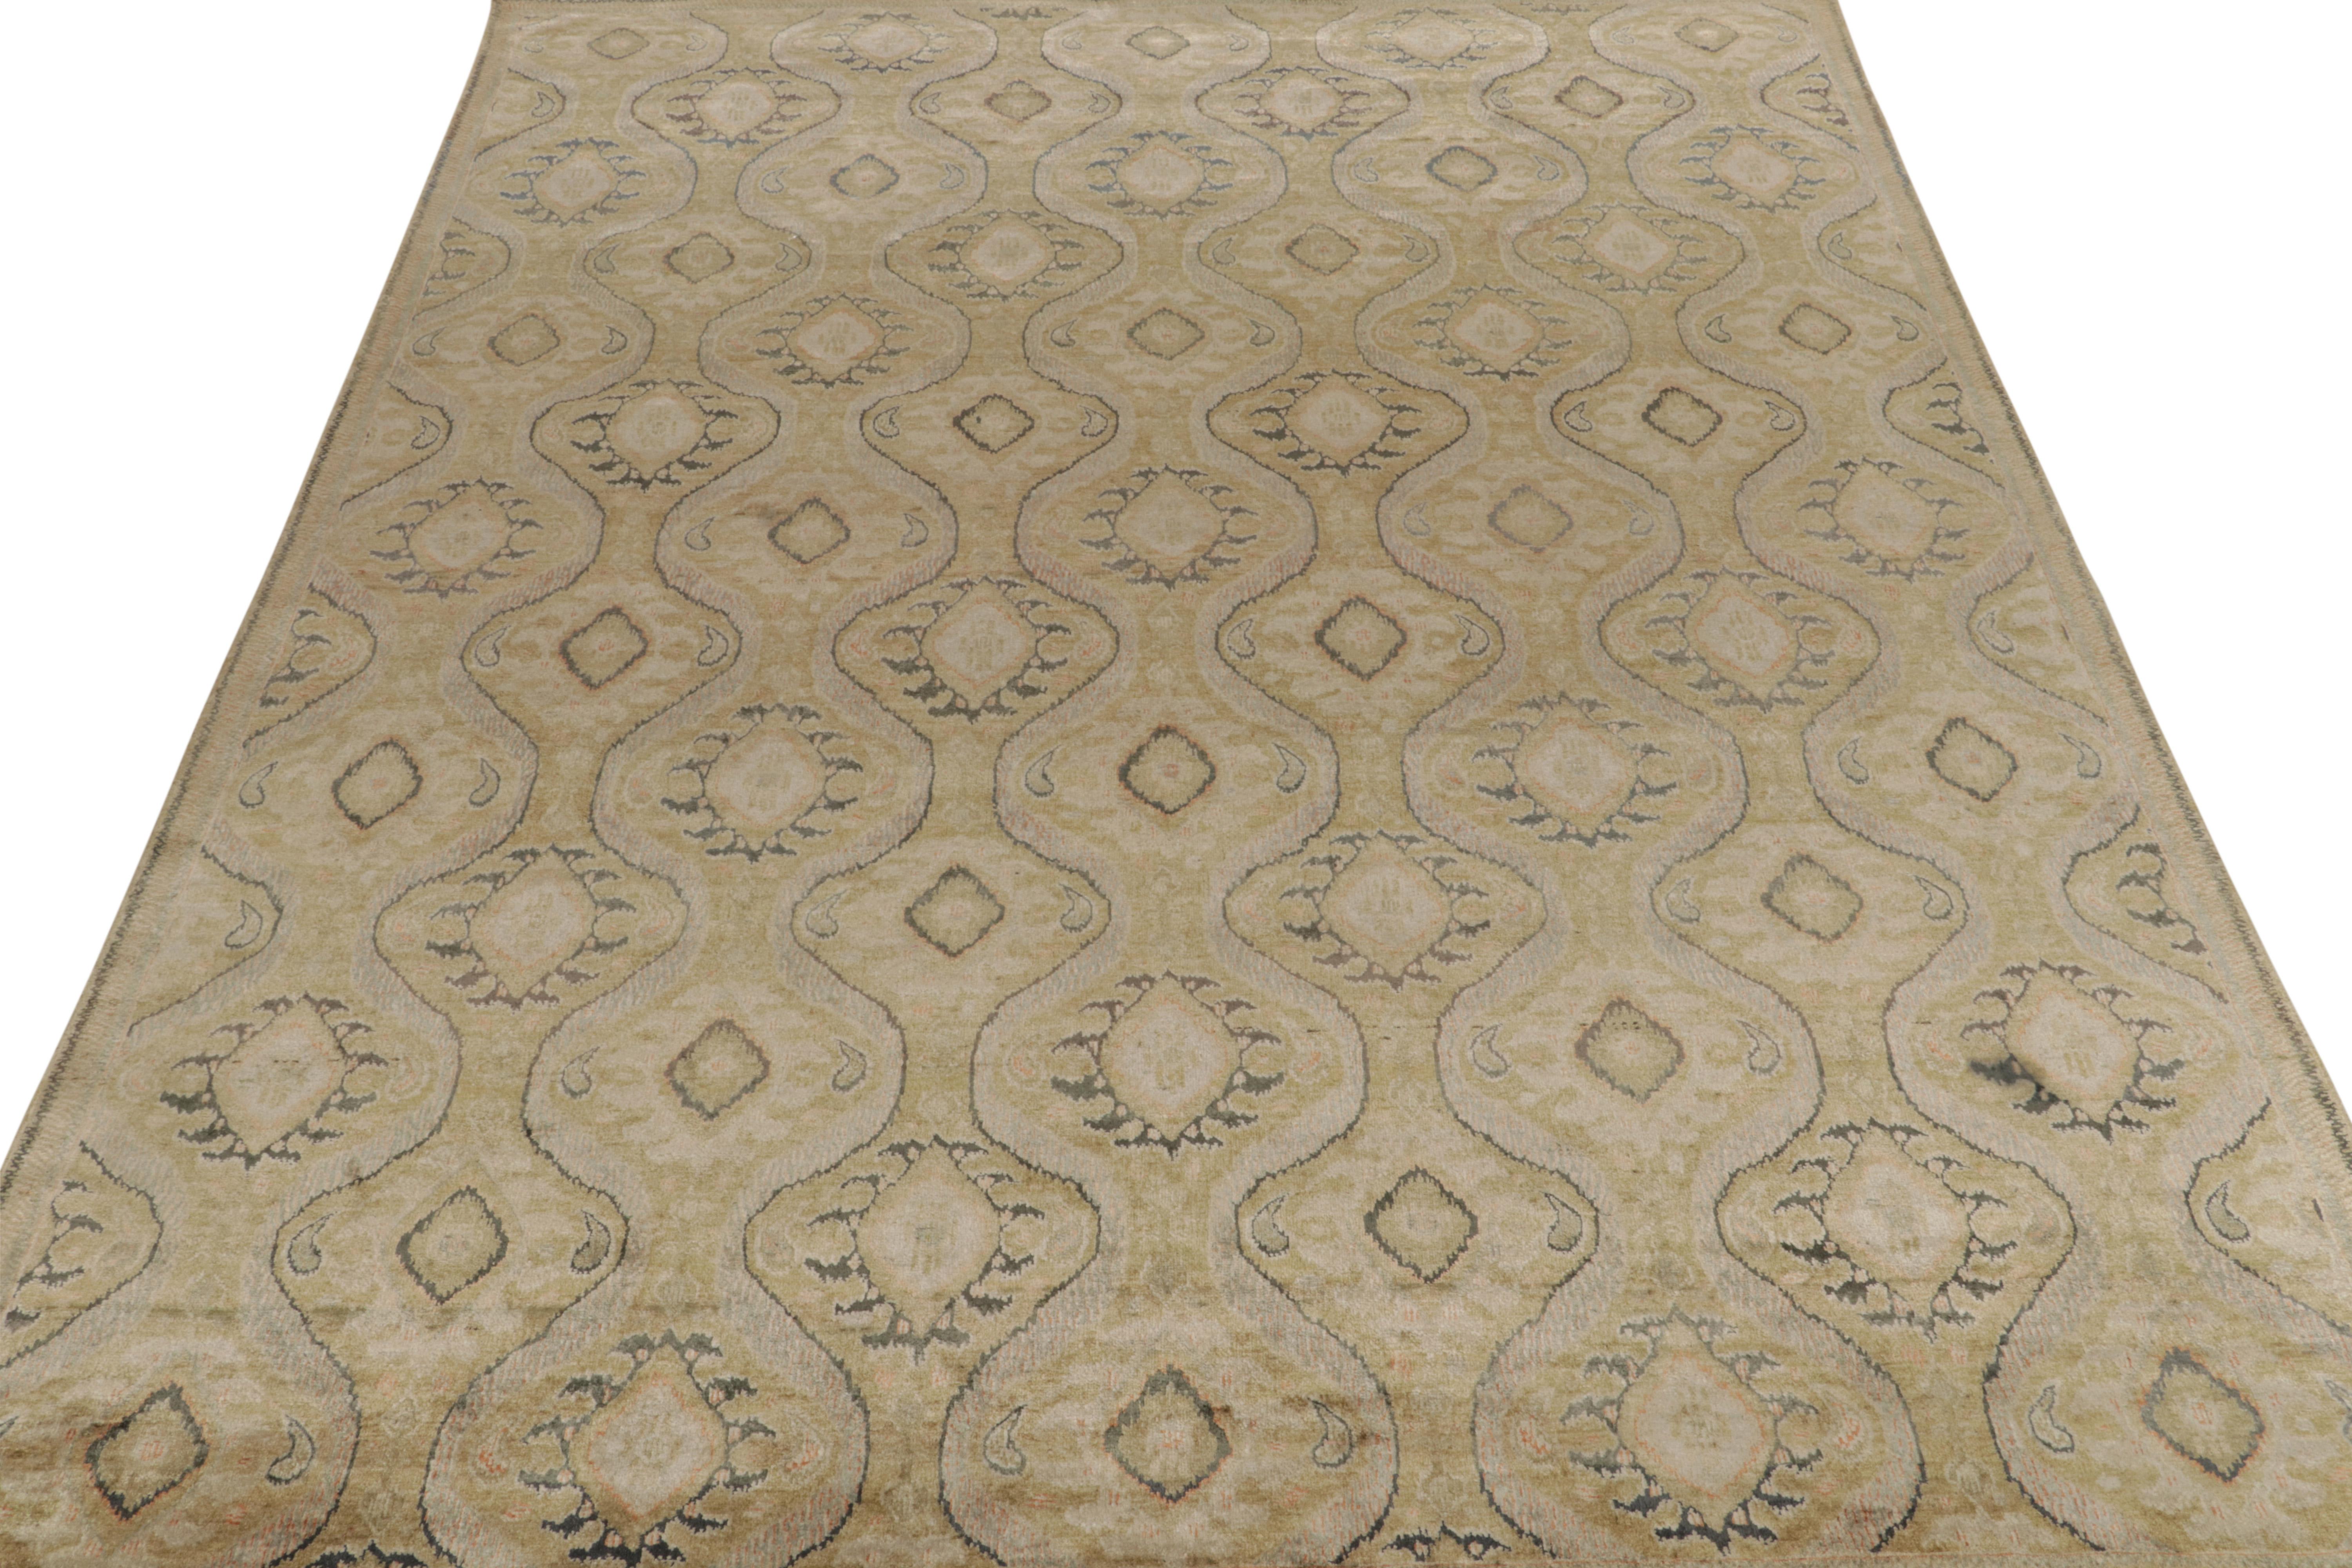 Indian Rug & Kilim’s Classic Style rug in Green and Beige-Brown Ikats Patterns For Sale